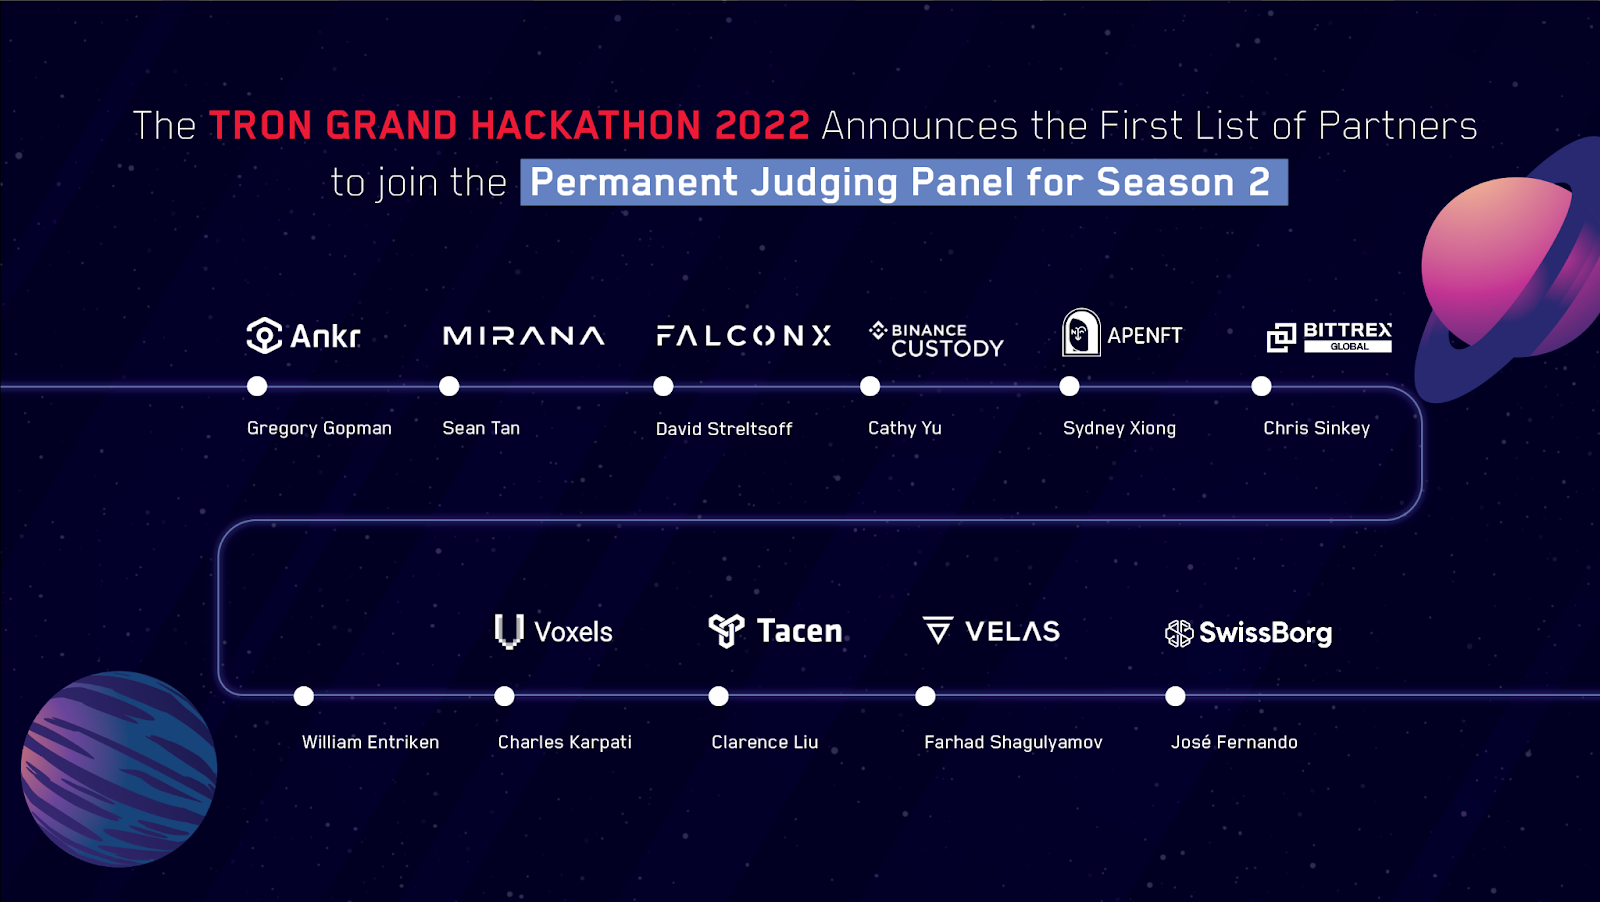 The TRON Grand Hackathon 2022 Announces First List of New Partners Joining the  Permanent Judging Panel for Season 2 - 1